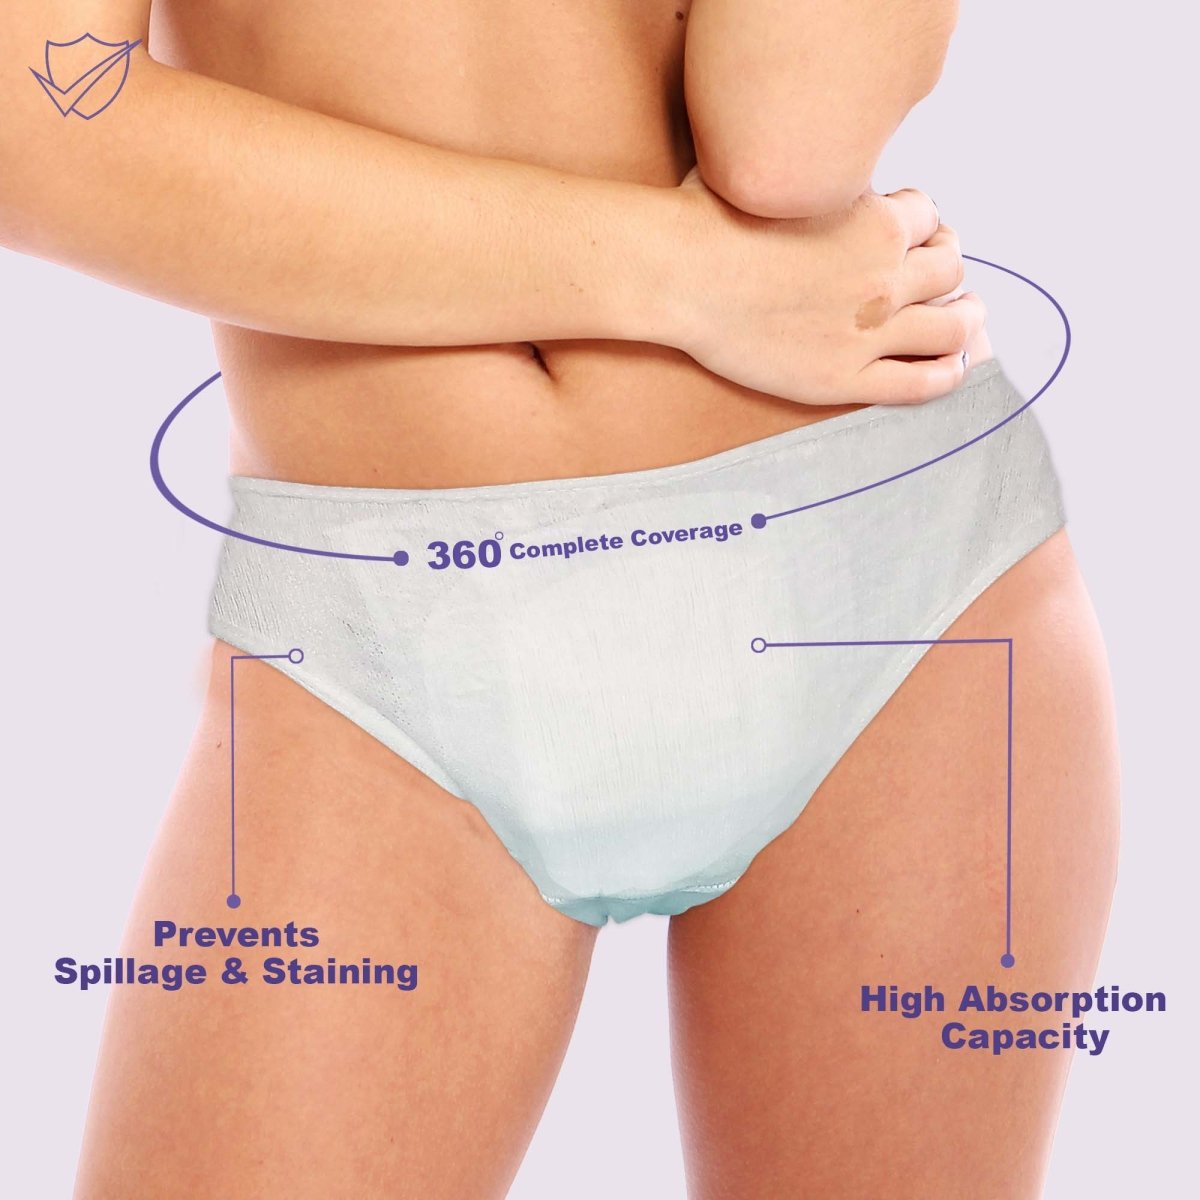 Trawee-PP Disposable Period Panty. High Absorbance for Medium-Heavy flow days. - TF012A-0XS